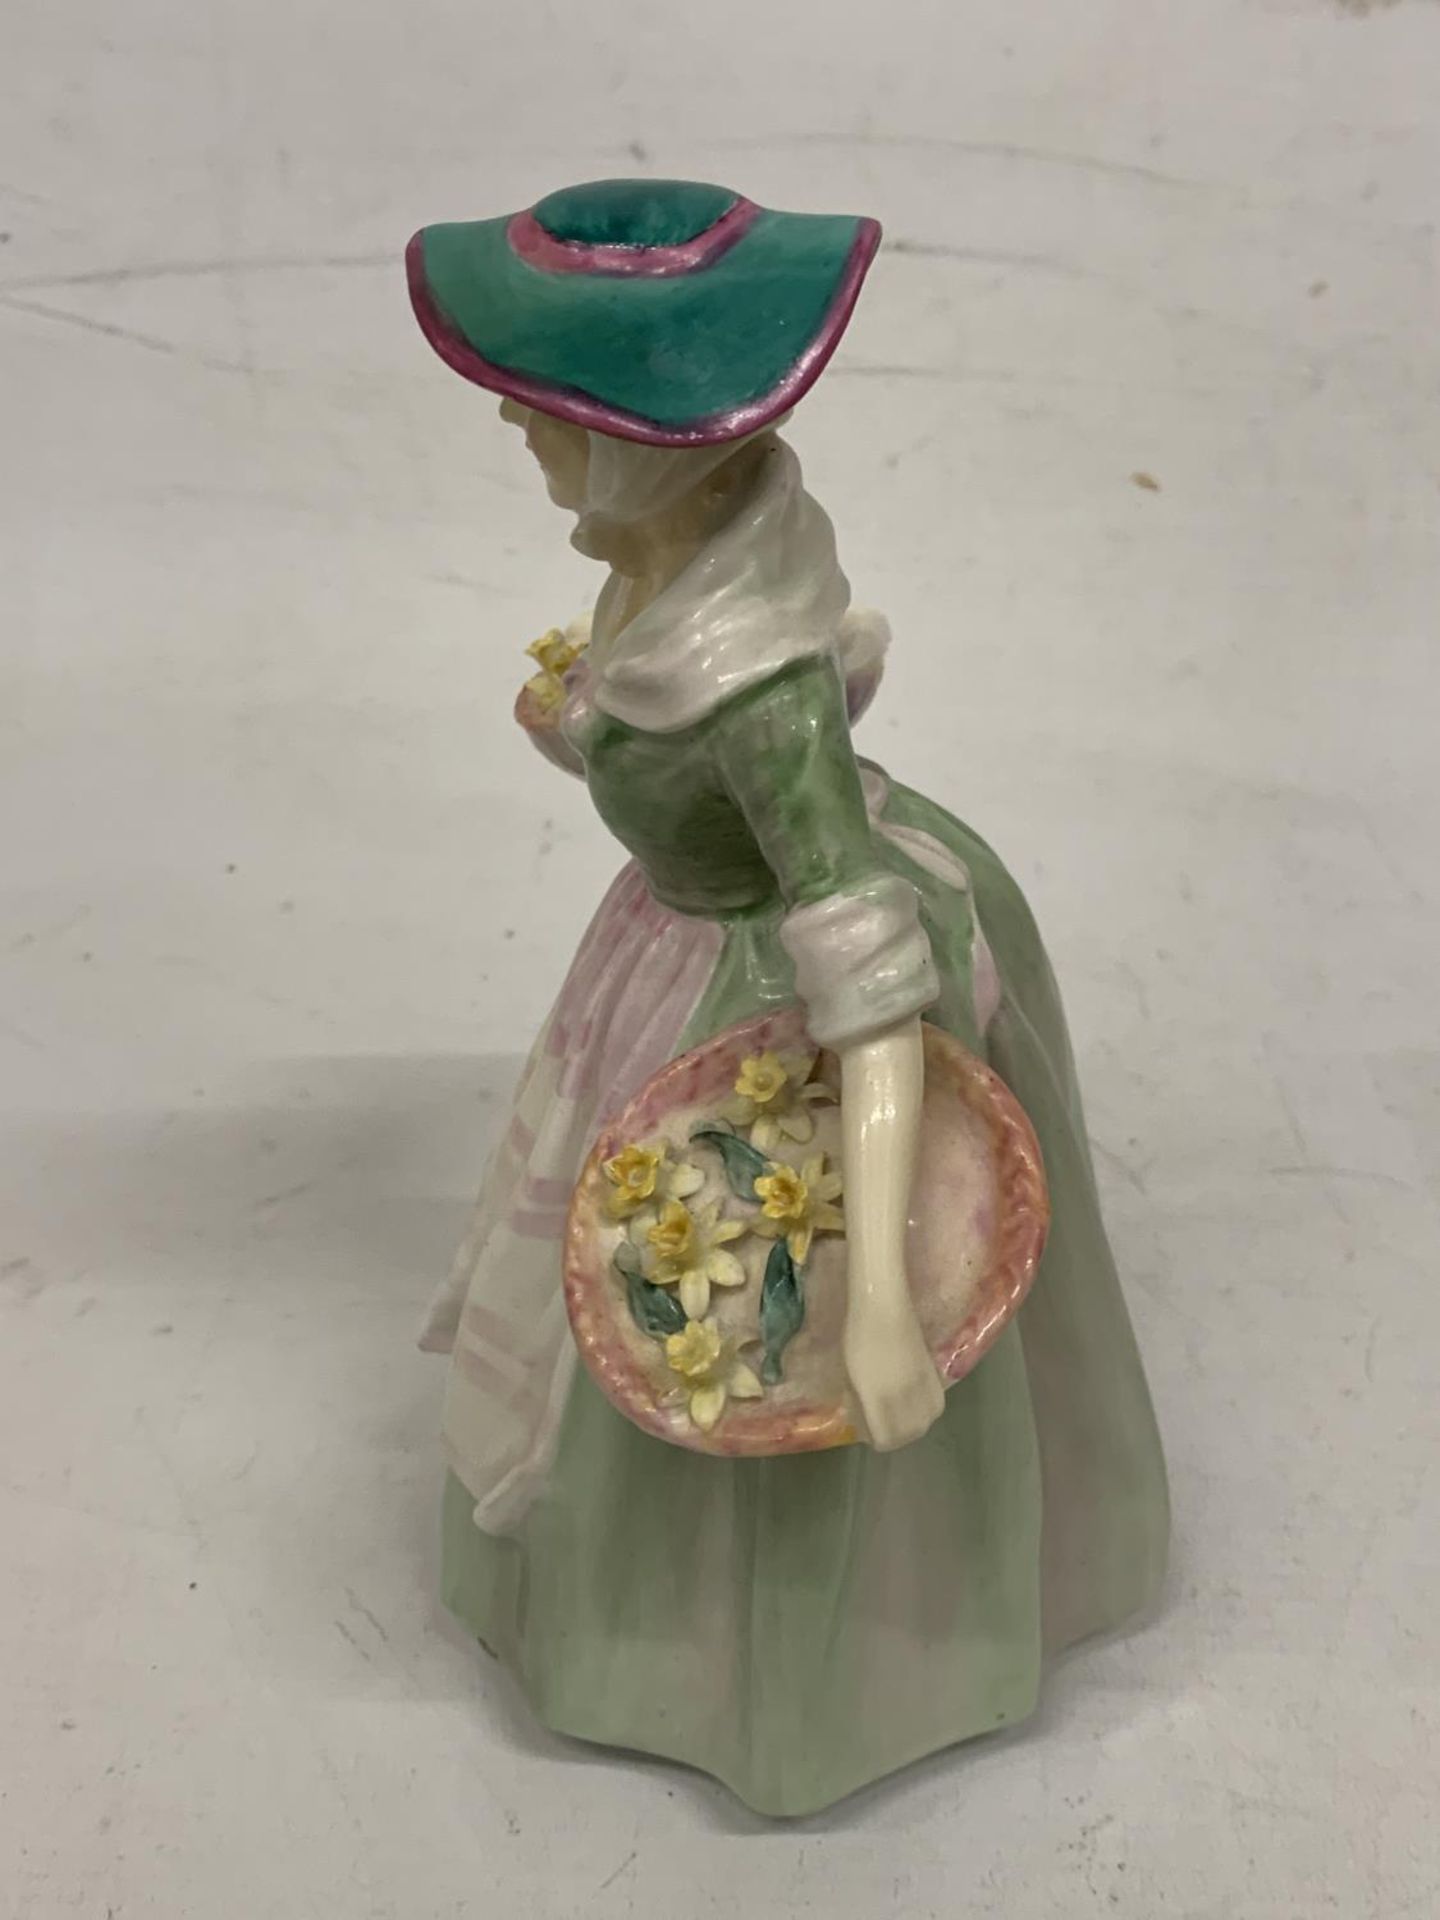 A ROYAL DOULTON FIGURINE "DAFFY DOWN DILLY" HN 1712 - Image 3 of 4